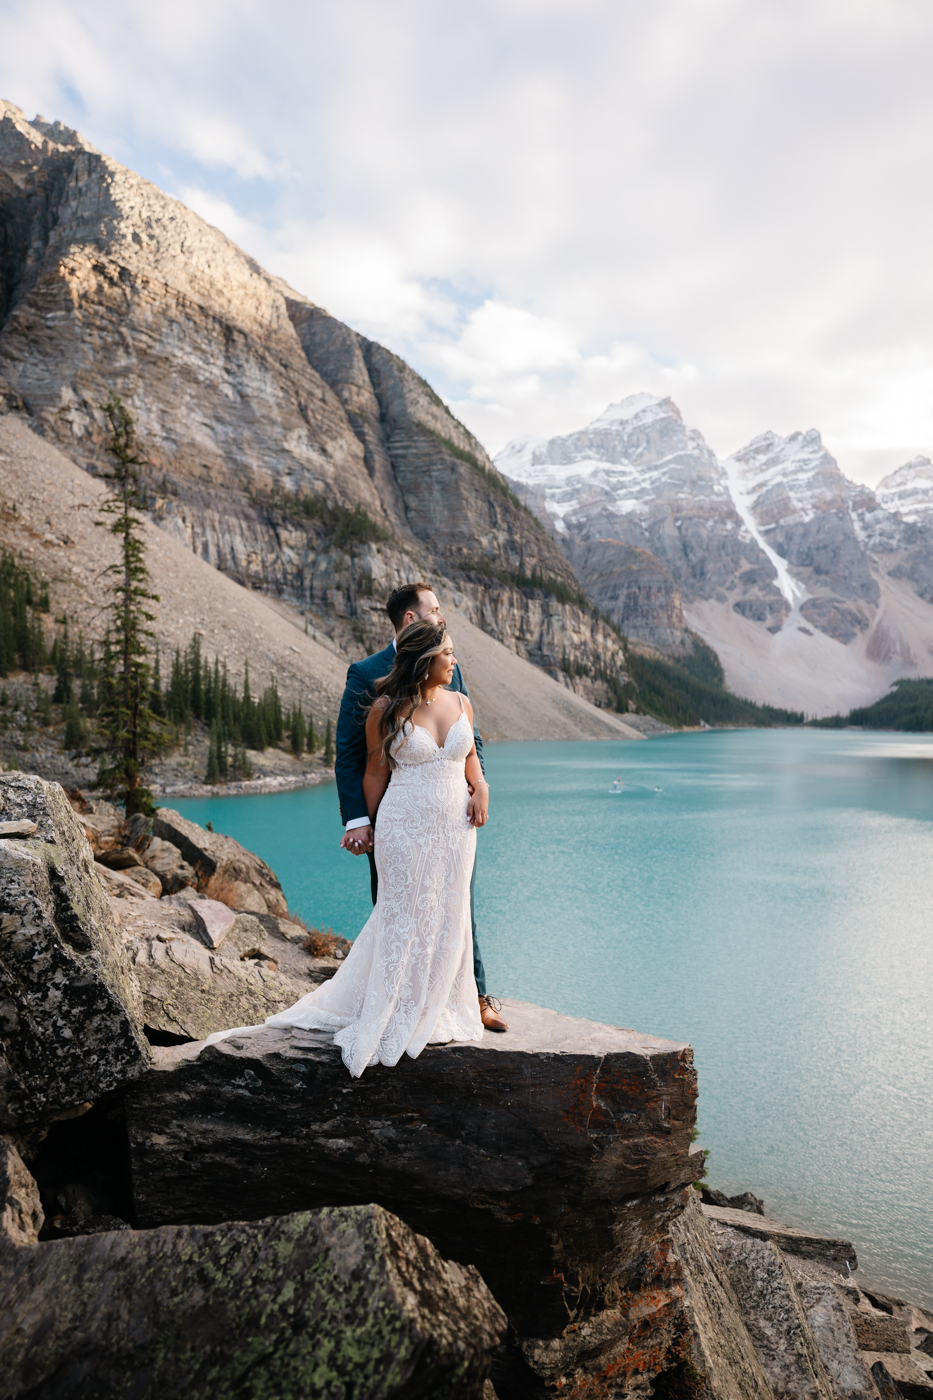 Bride and groom hold hands and look out over sunset at Moraine Lake